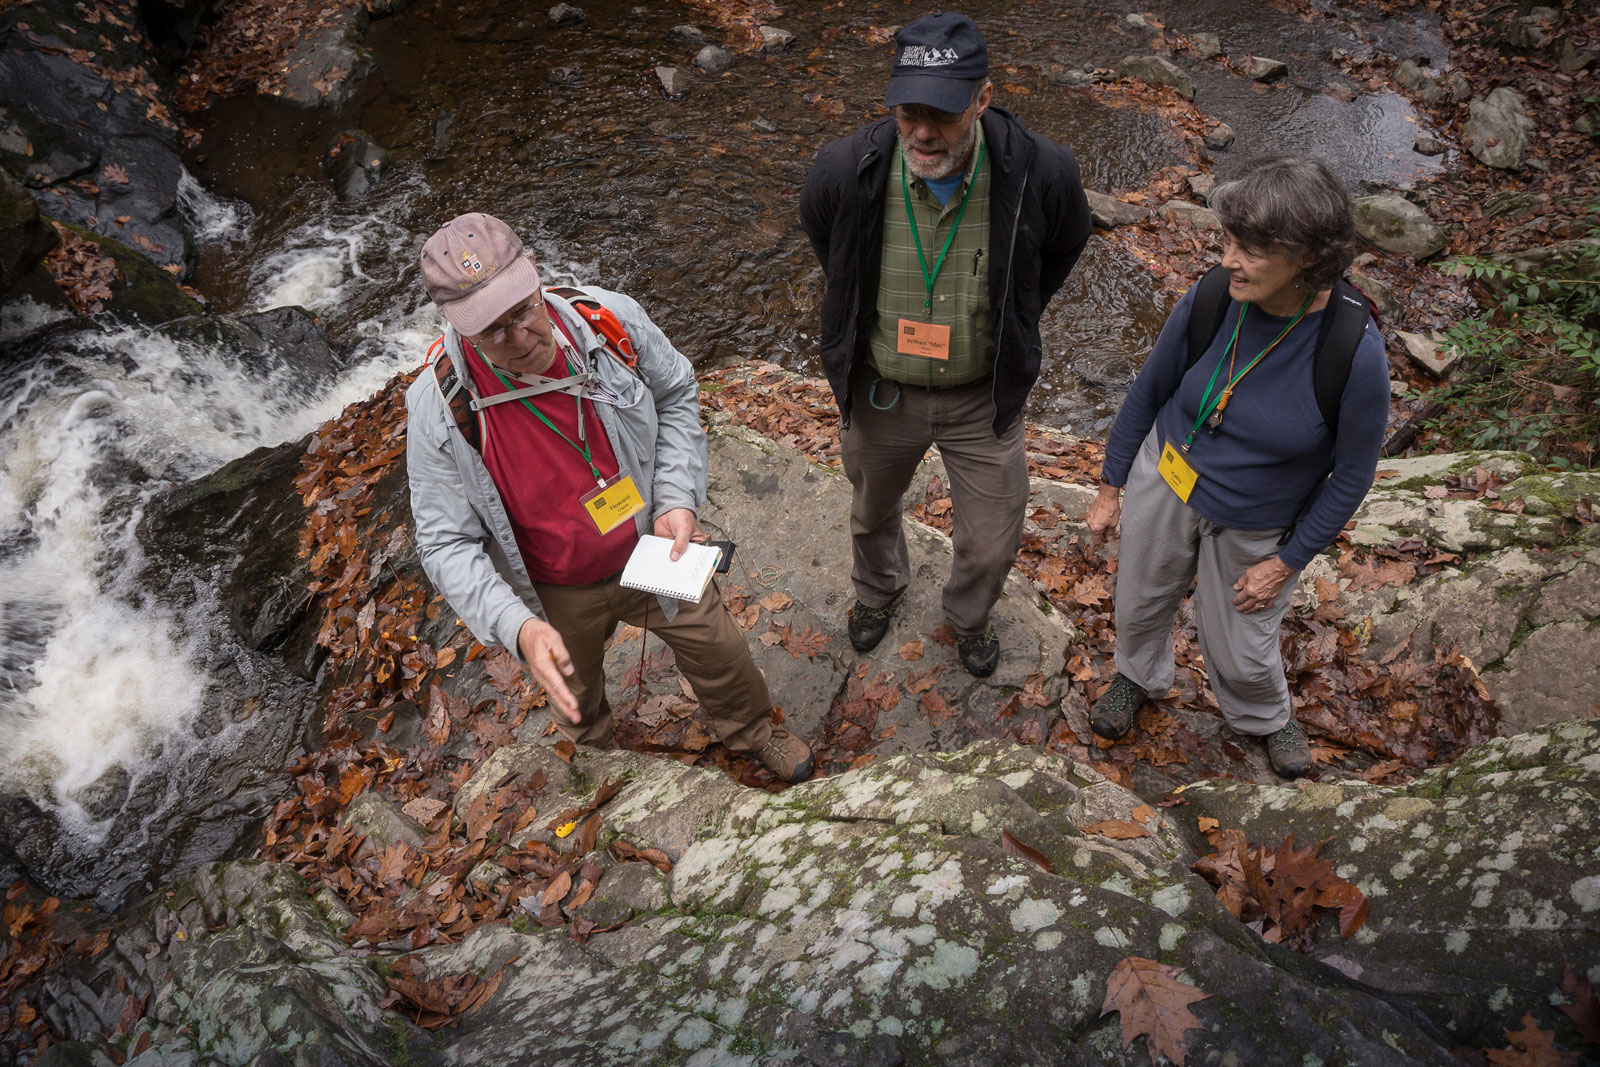 Geology workshop participants study a rock formation in the Smoky Mountains